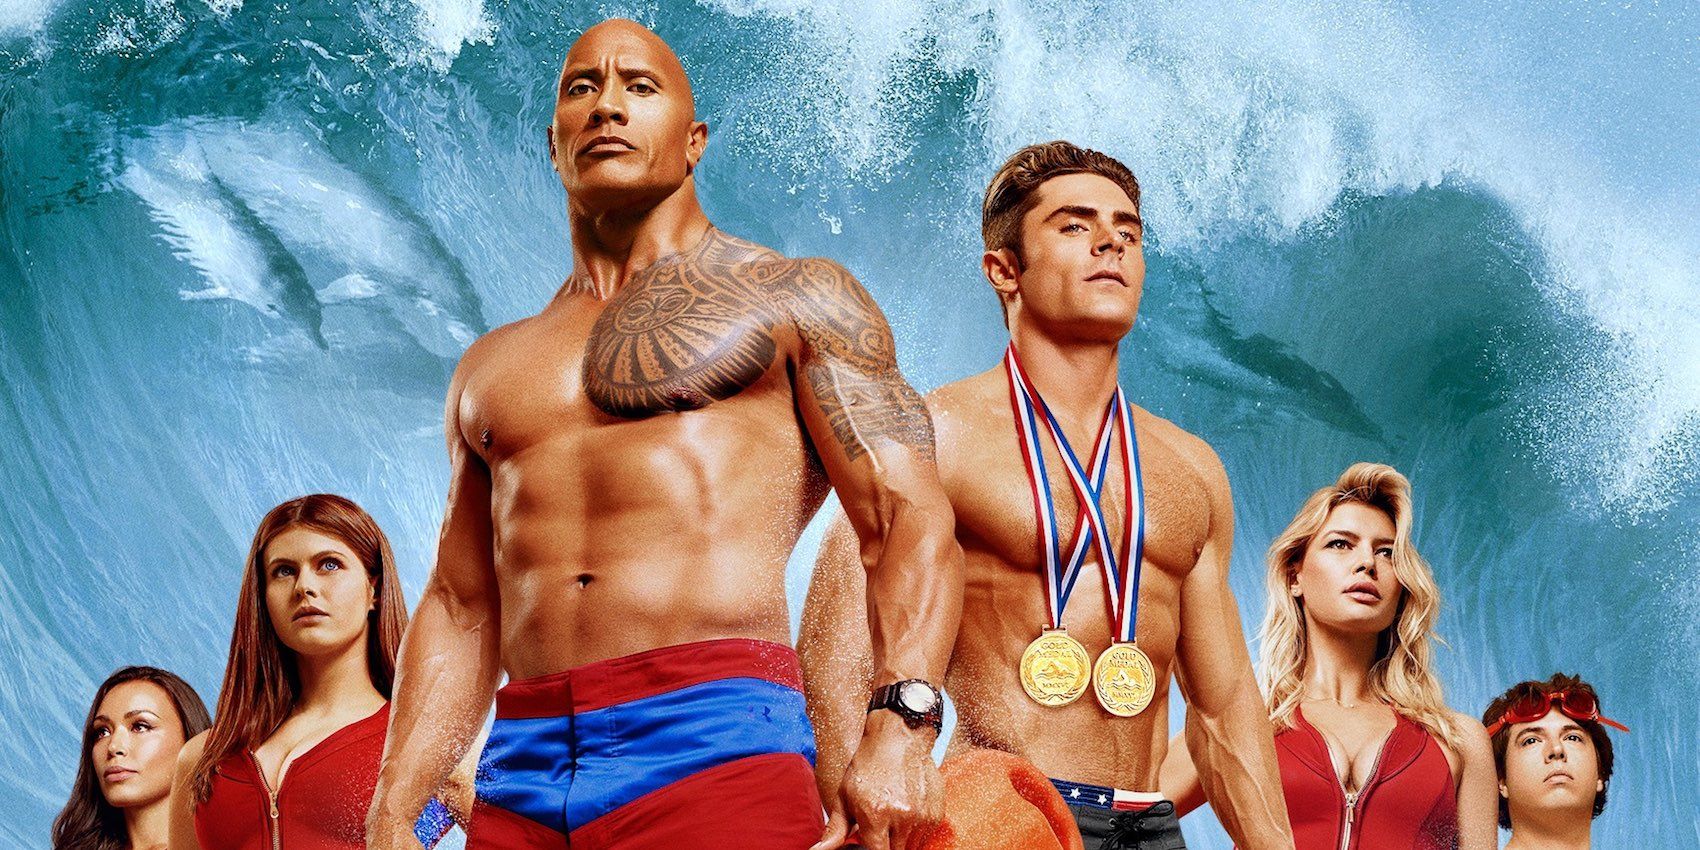 Baywatch Movie Review